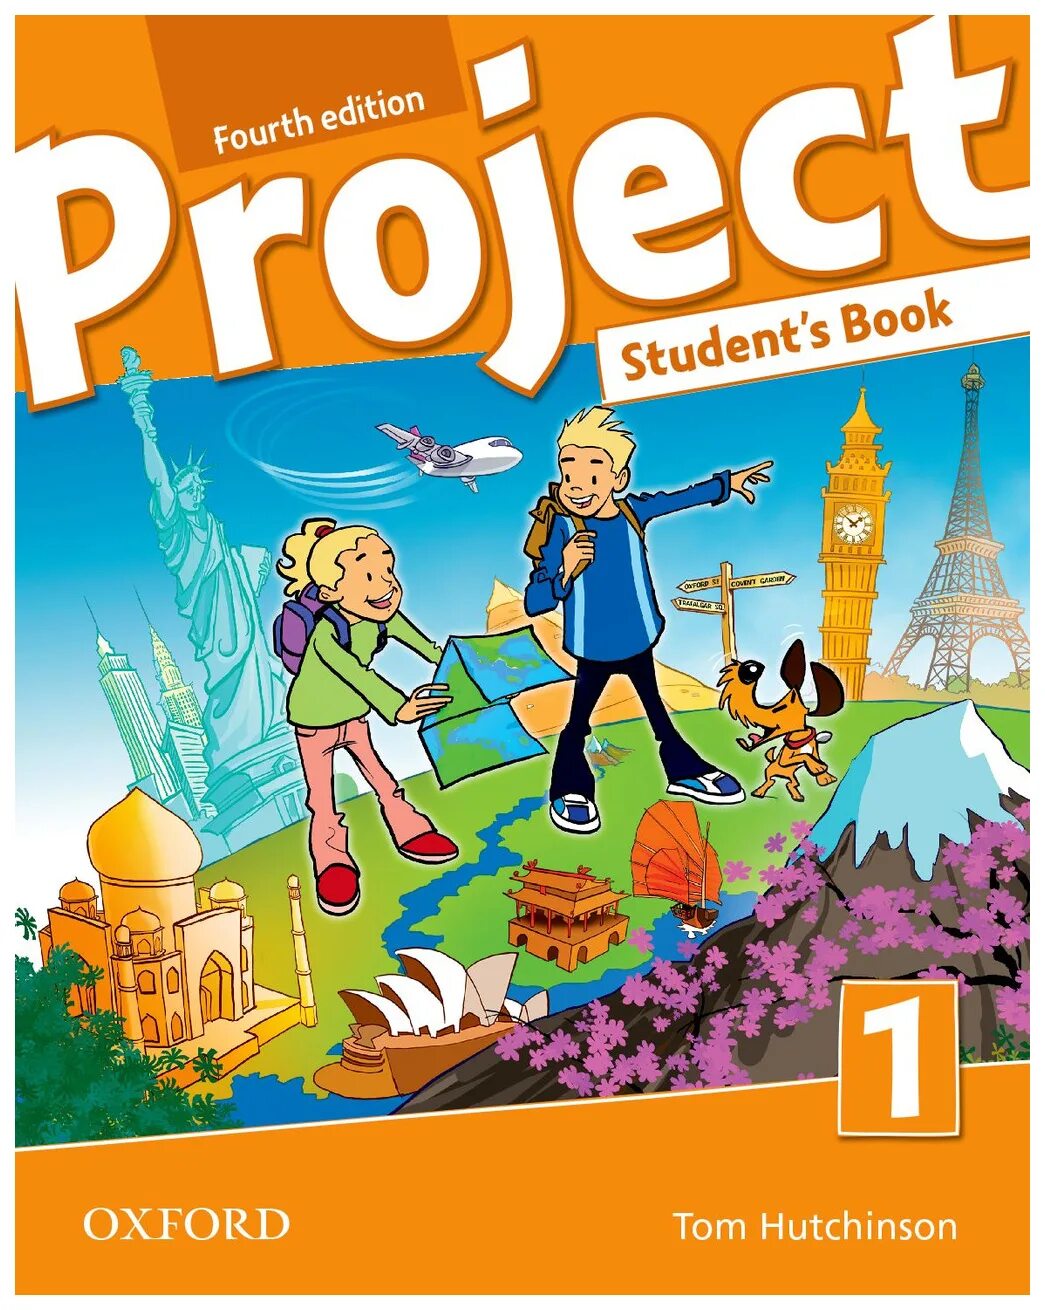 Project 1 fourth Edition students book. Project 1 4th Edition. Project student book4 fourth Edition Workbook book. Рабочая тетрадь Project 1 Oxford Tom Hutchinson. Pupils book 4 1